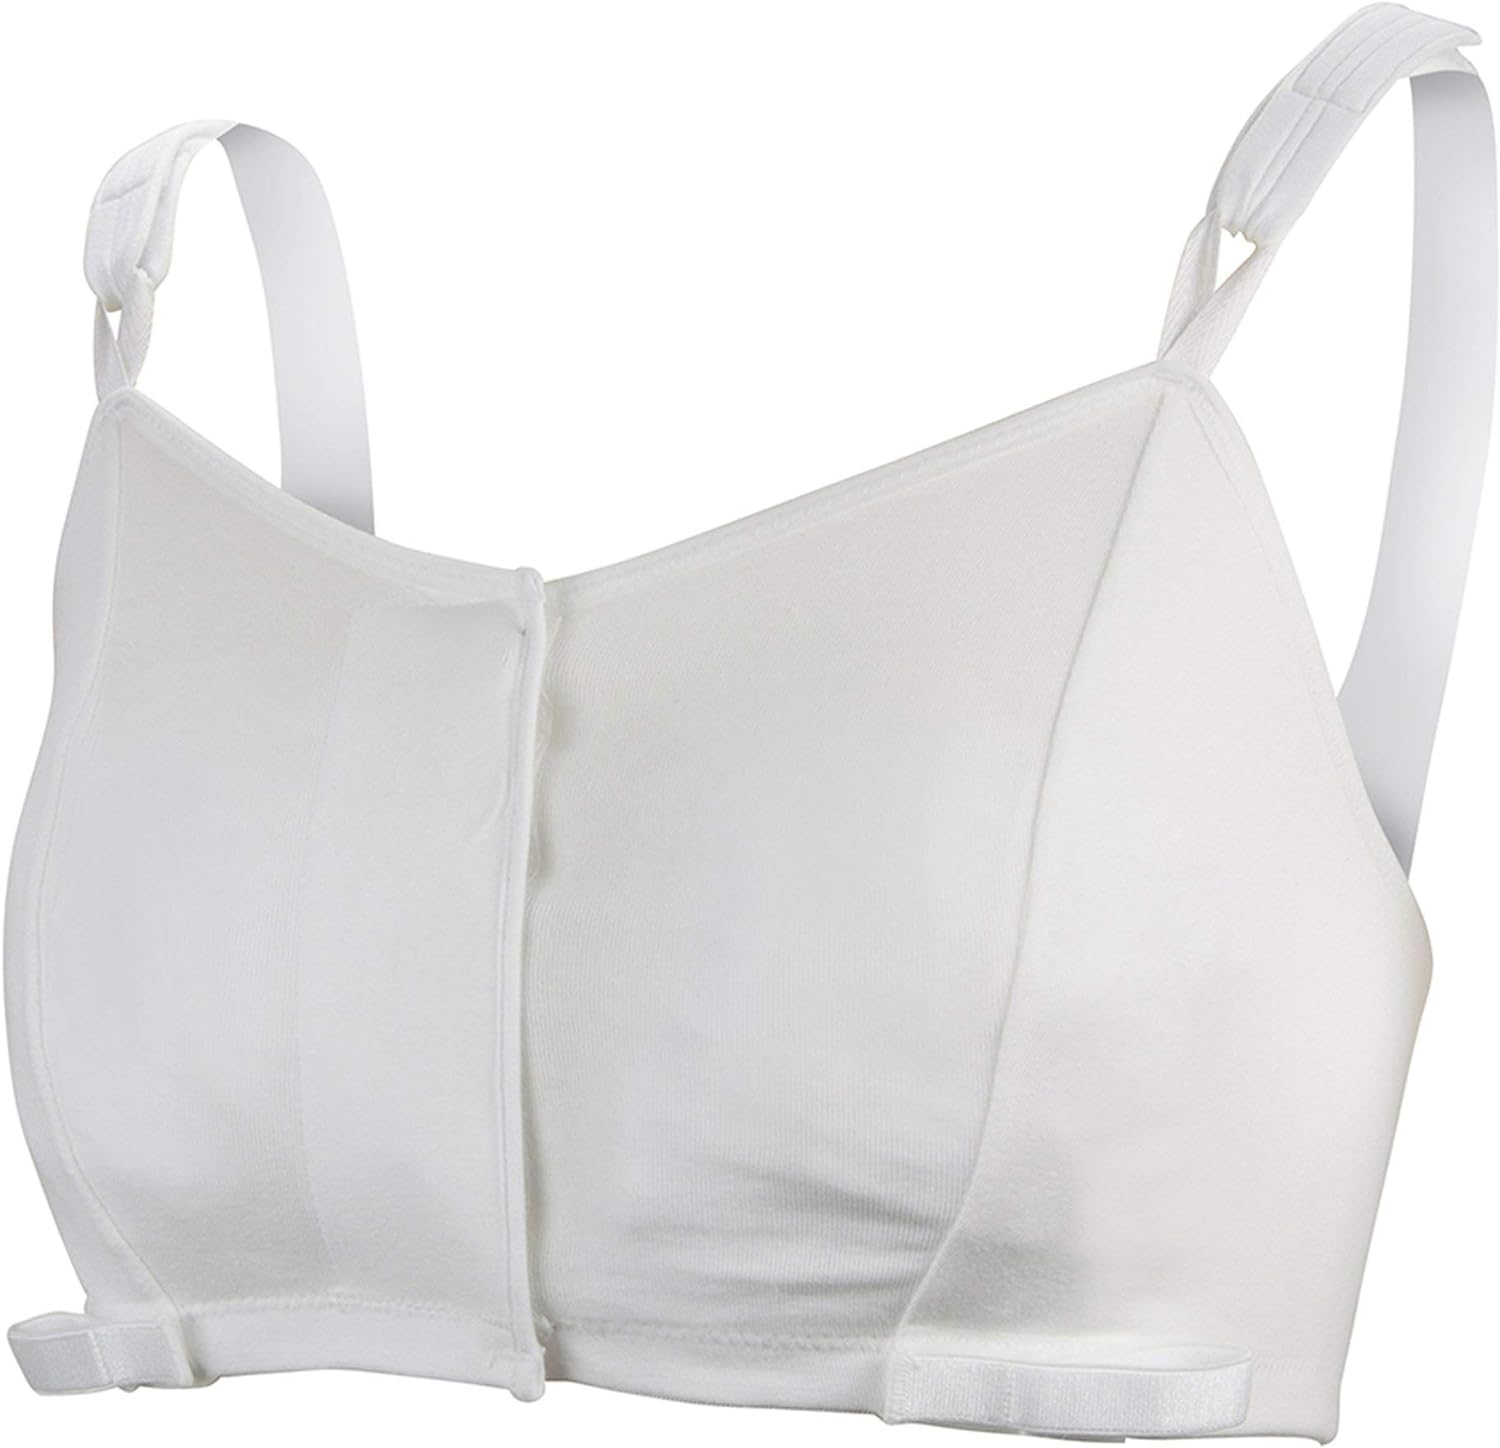 McKesson Post-Surgical Bra, White, 40B / 38C / 36D, 40 in to 42 in, 1 Count